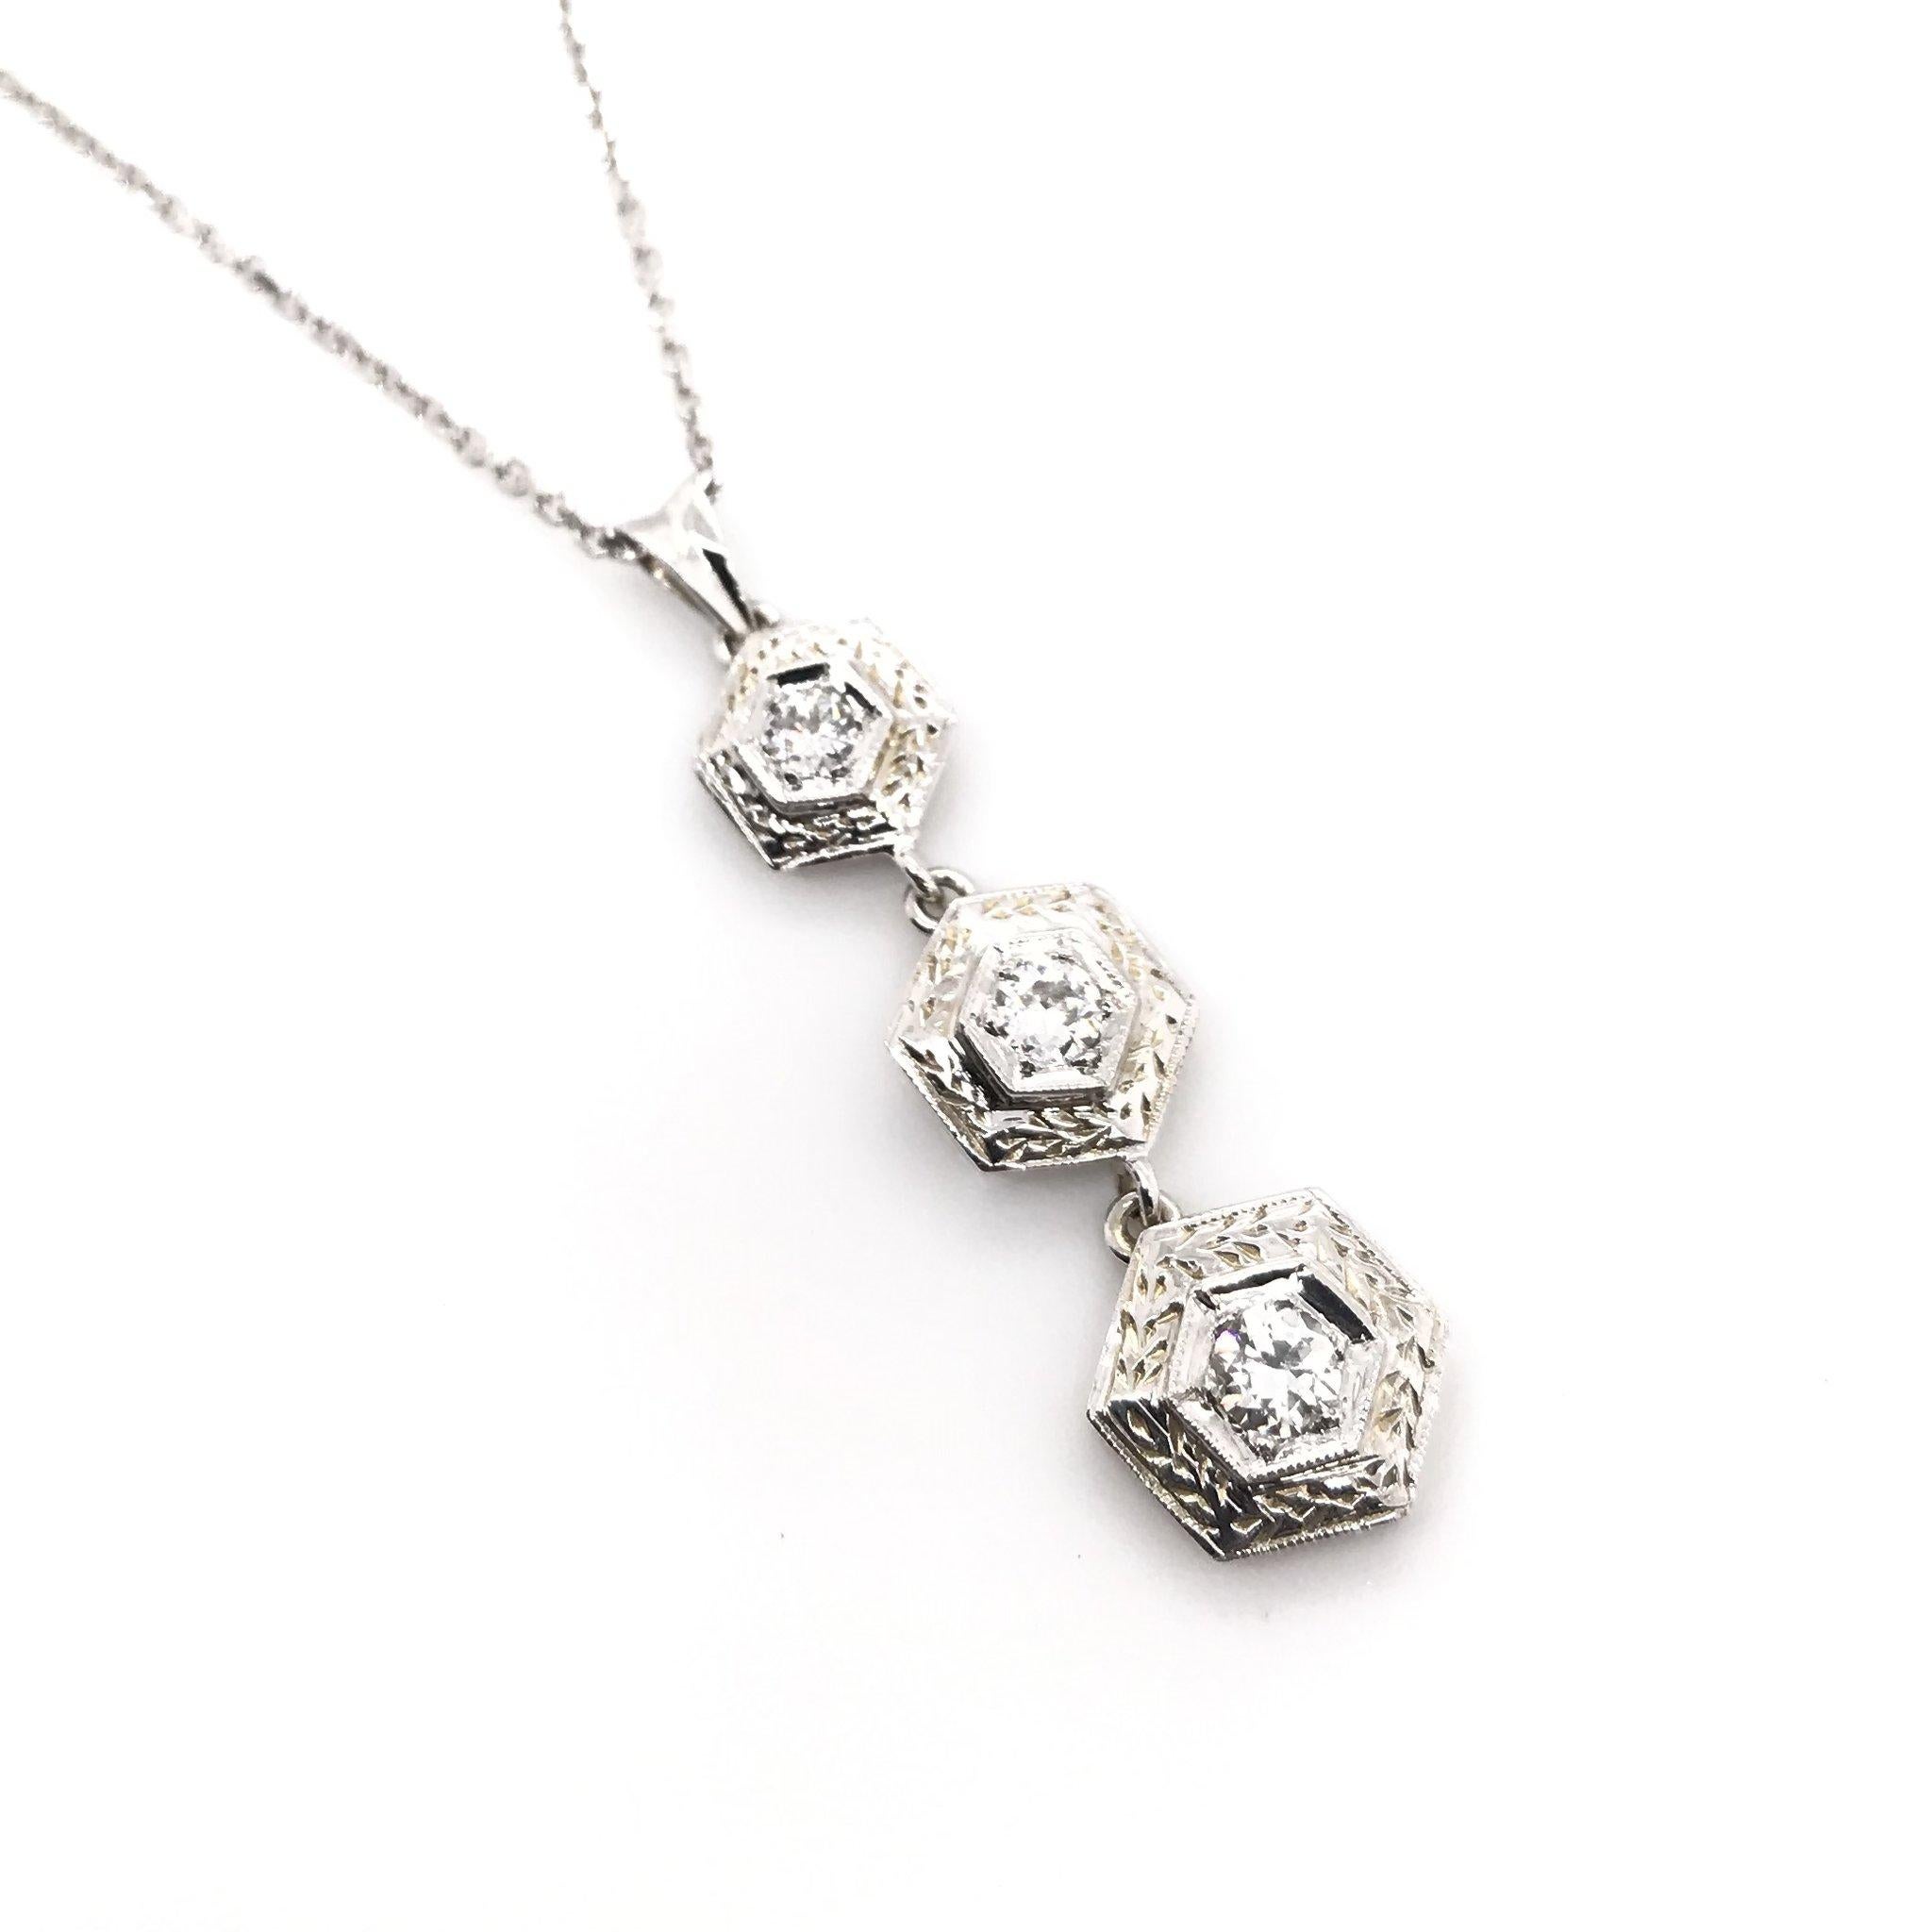 This beautiful diamond necklace is a contemporary piece, crafted in an Art Deco antique style. The 14K white gold pendant features a trinity drop style with extensive engravings, milgrain accents, and three sparkling diamond accents. The necklace's